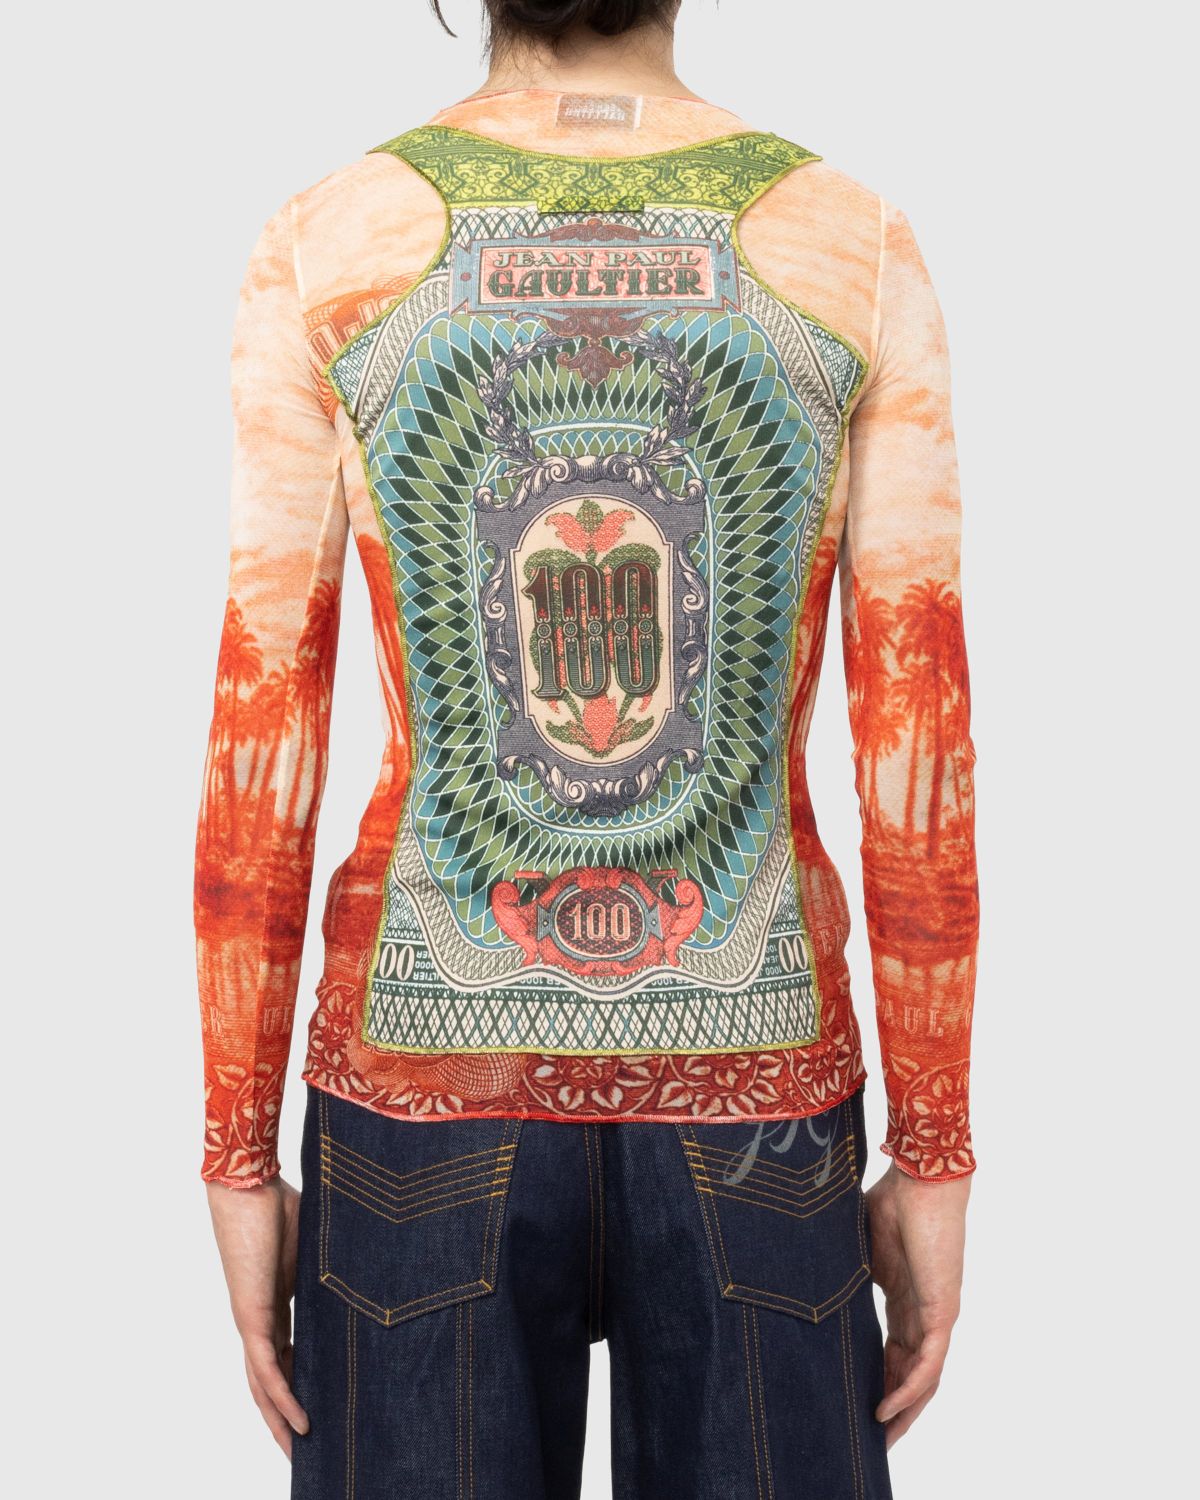 Jean Paul Gaultier – Banknote and Palm Tree Print Top Multi - Sweats - Green - Image 2